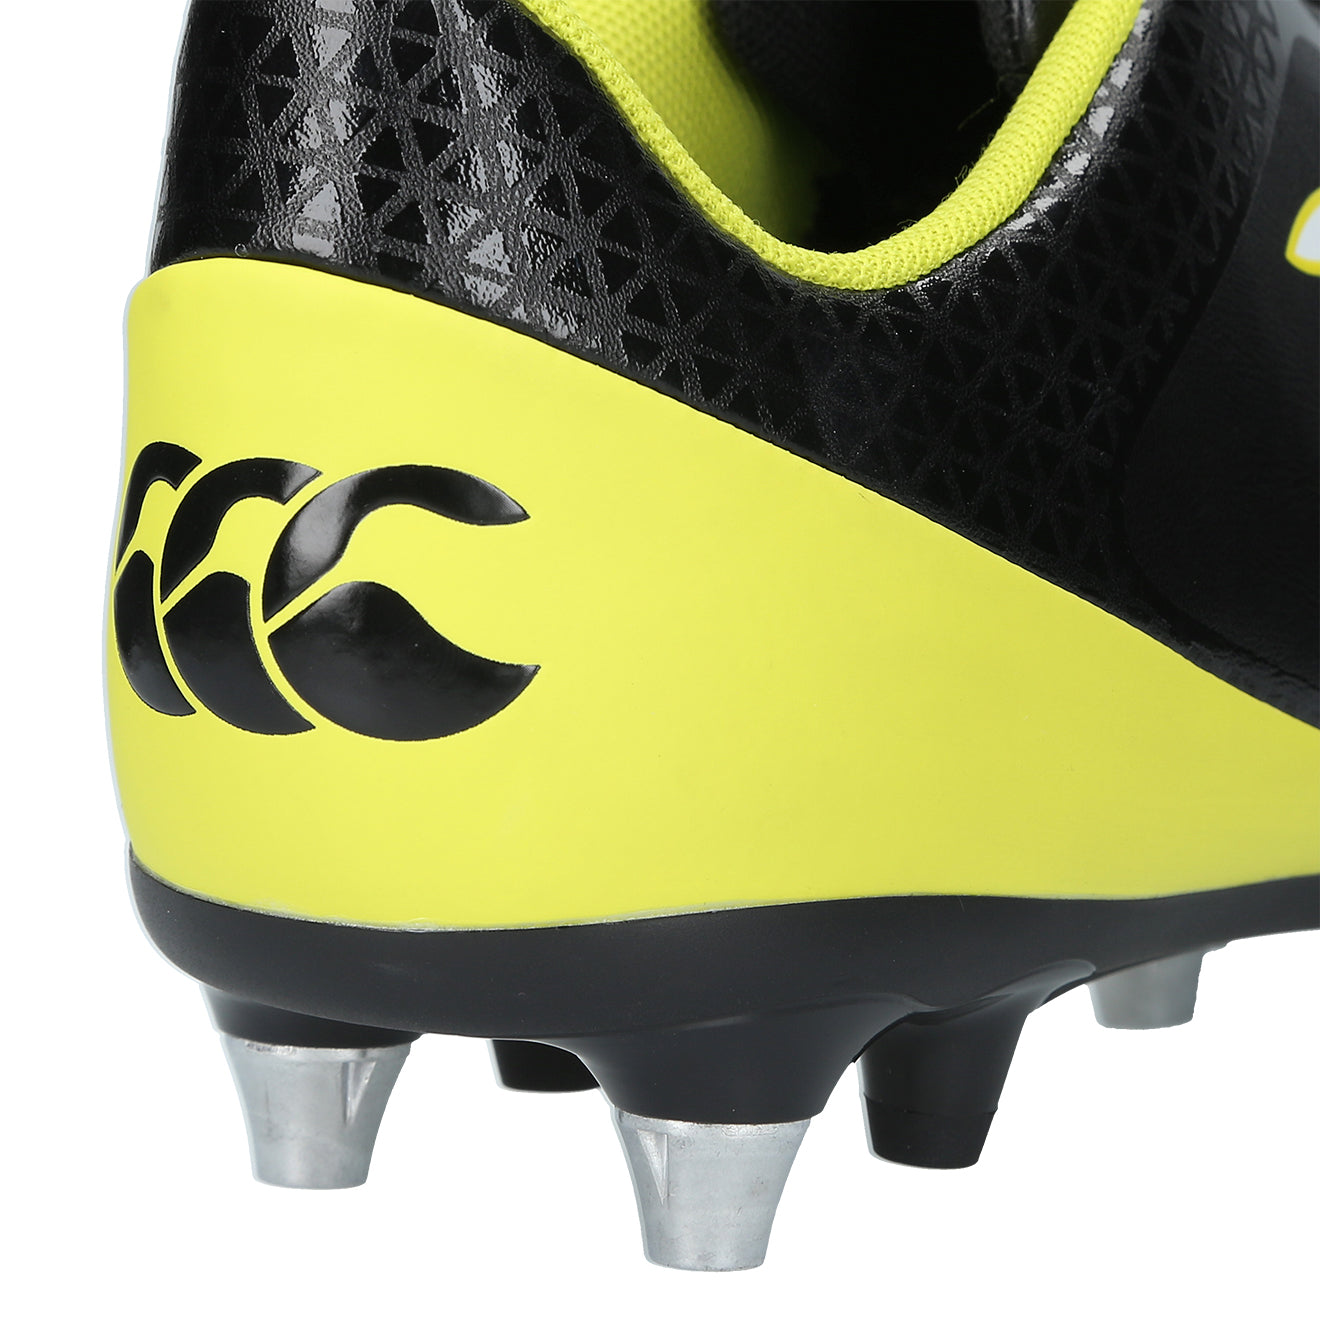 Canterbury Stampede 2.0 SG Rugby Boots - Black